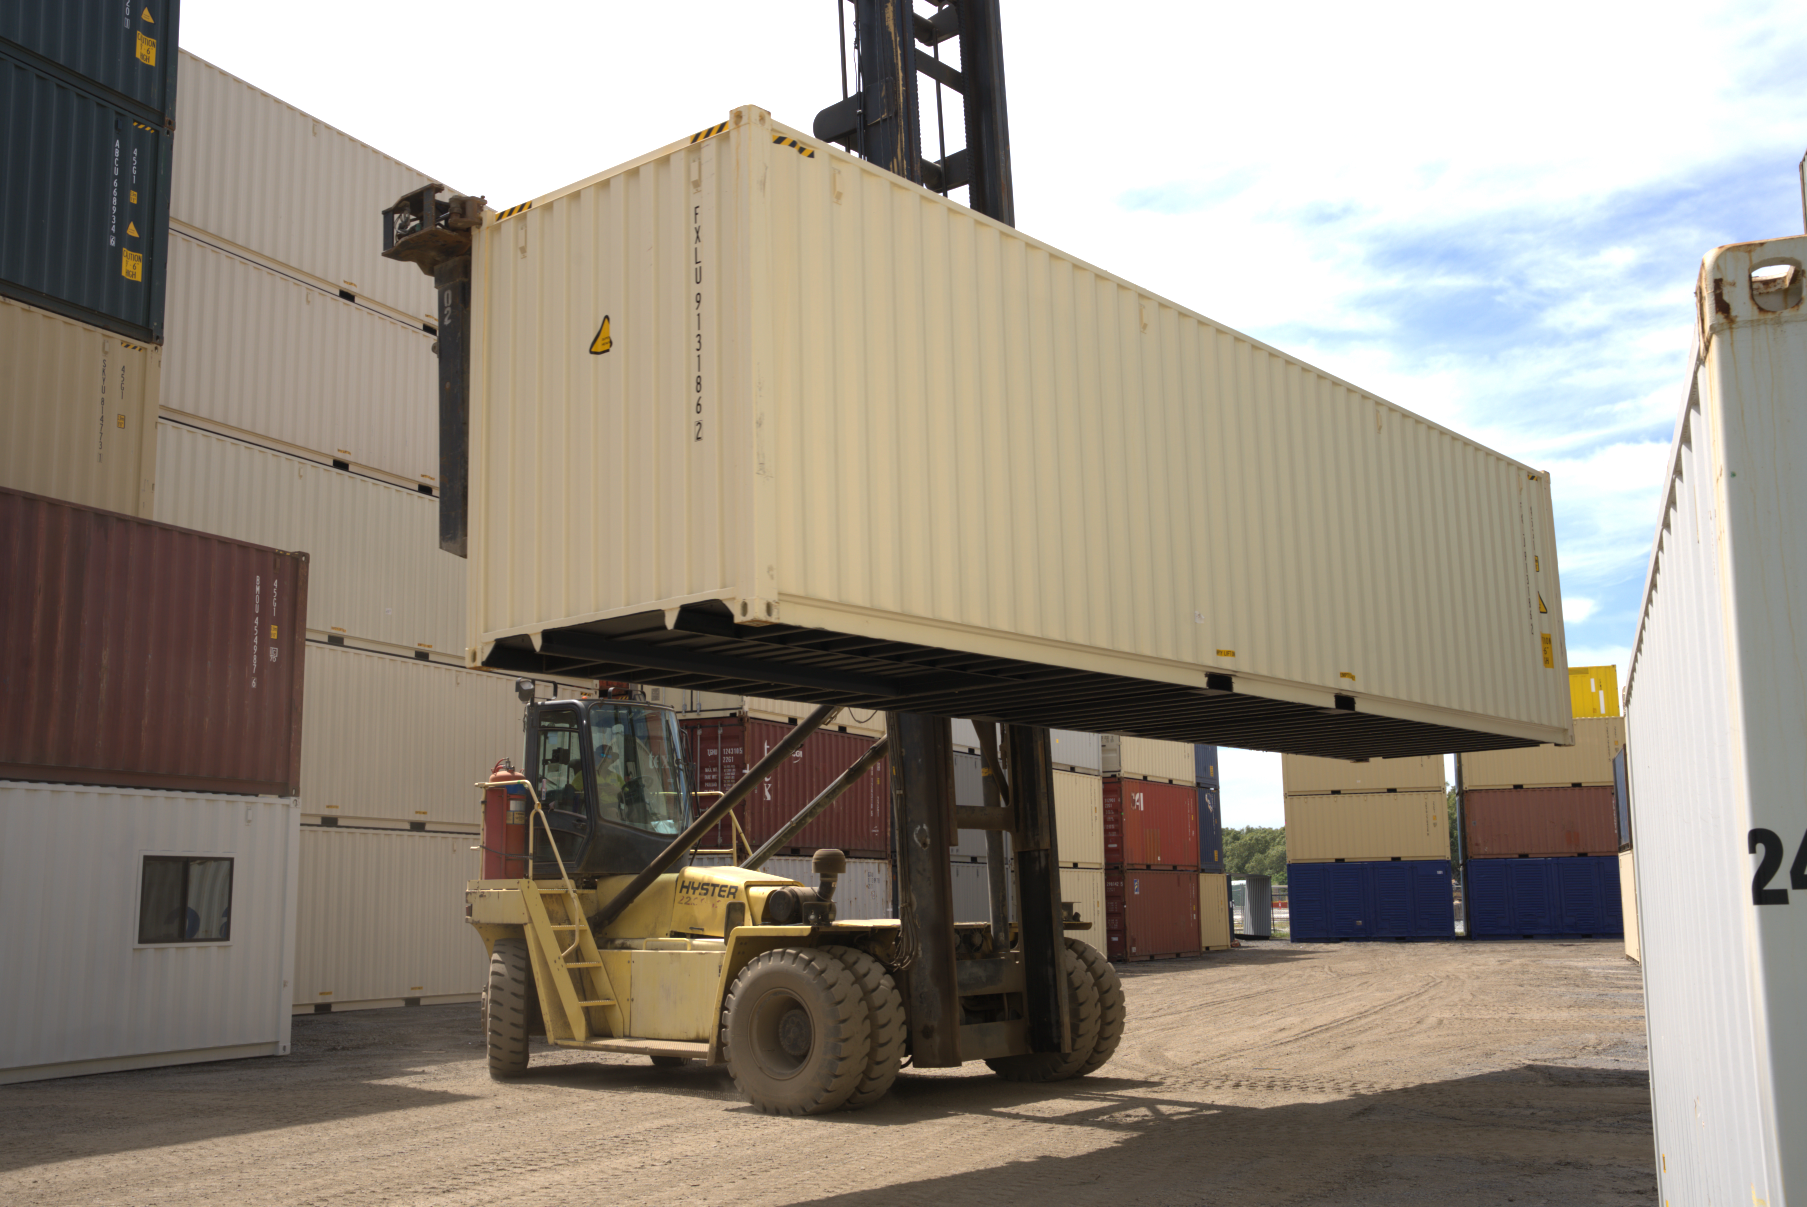 40ft container lifted by a forklift